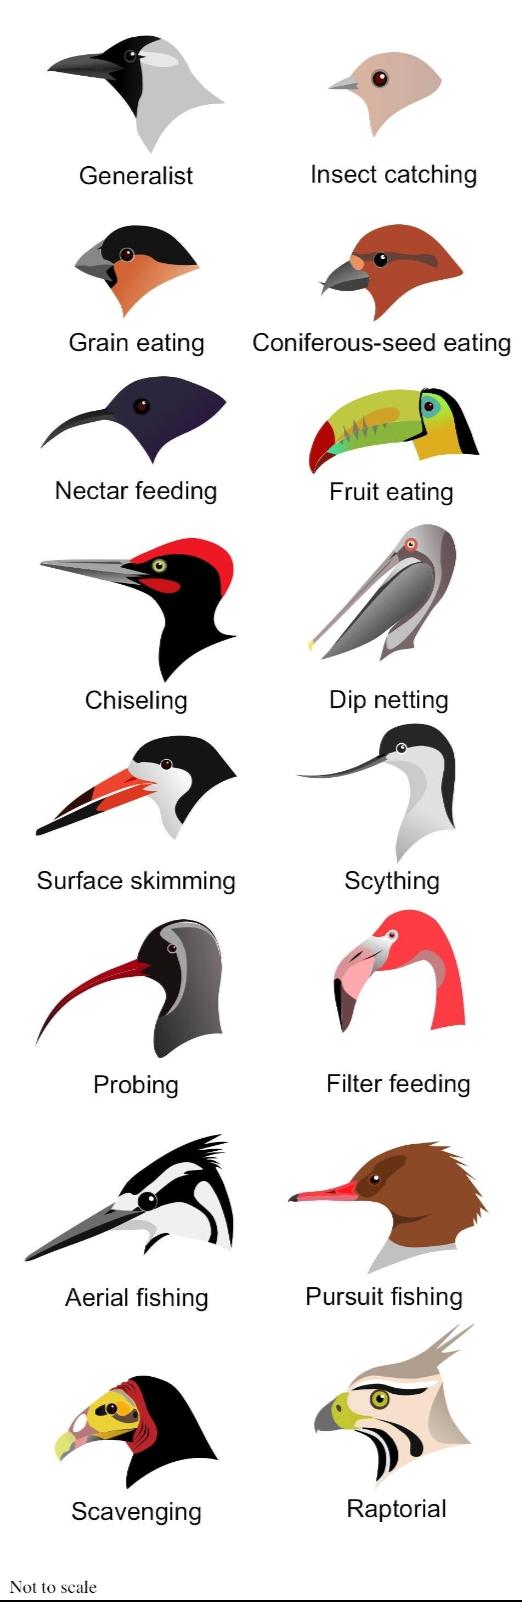 Bird beaks in their natural environment, if you please.